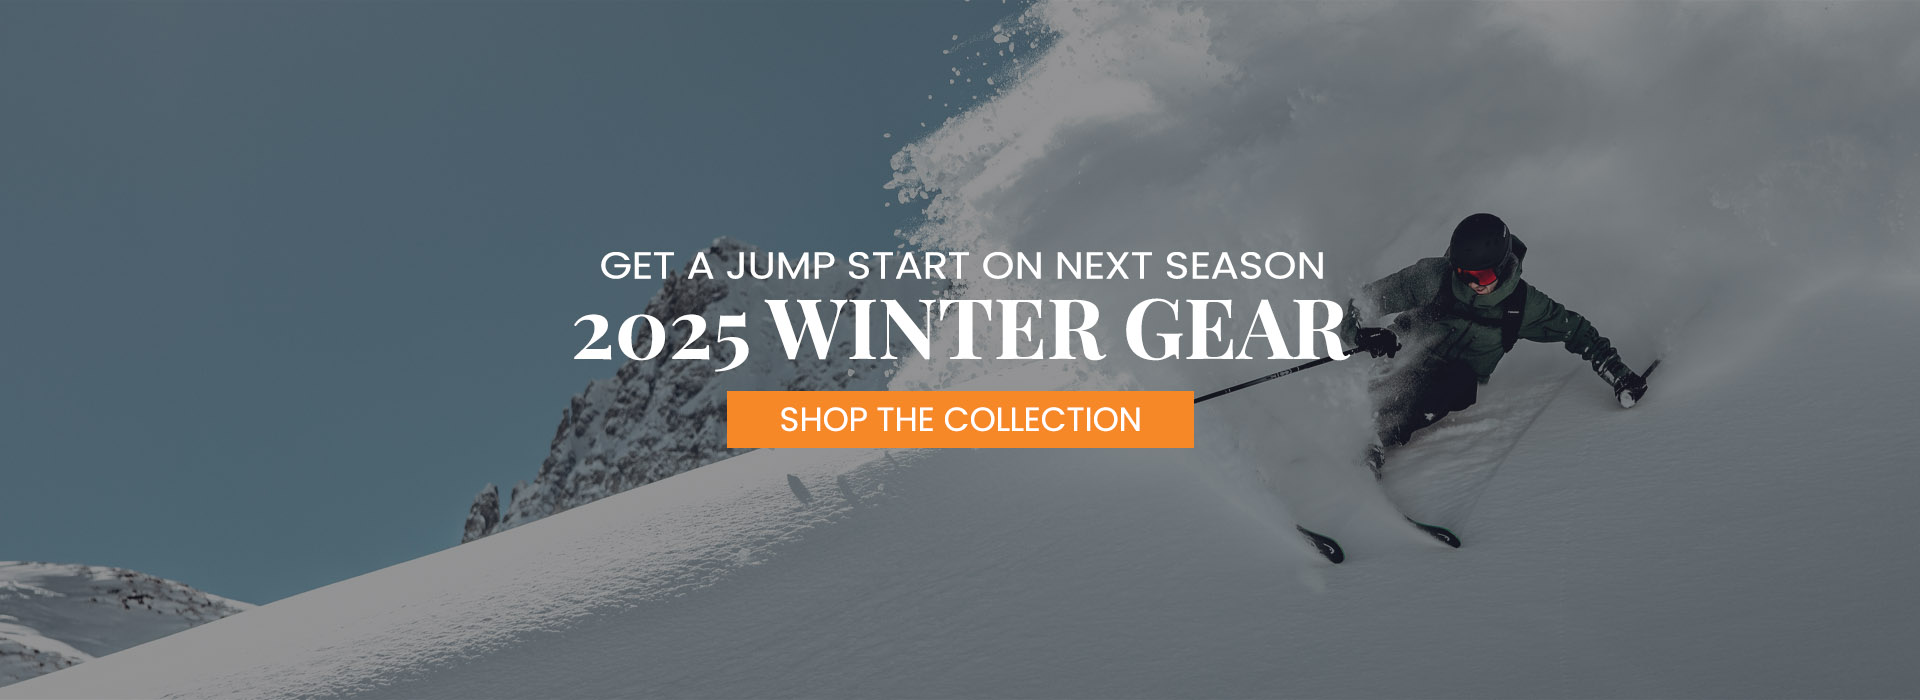 Shop Next Year's Collection Of 2025 Ski Gear Available Now!